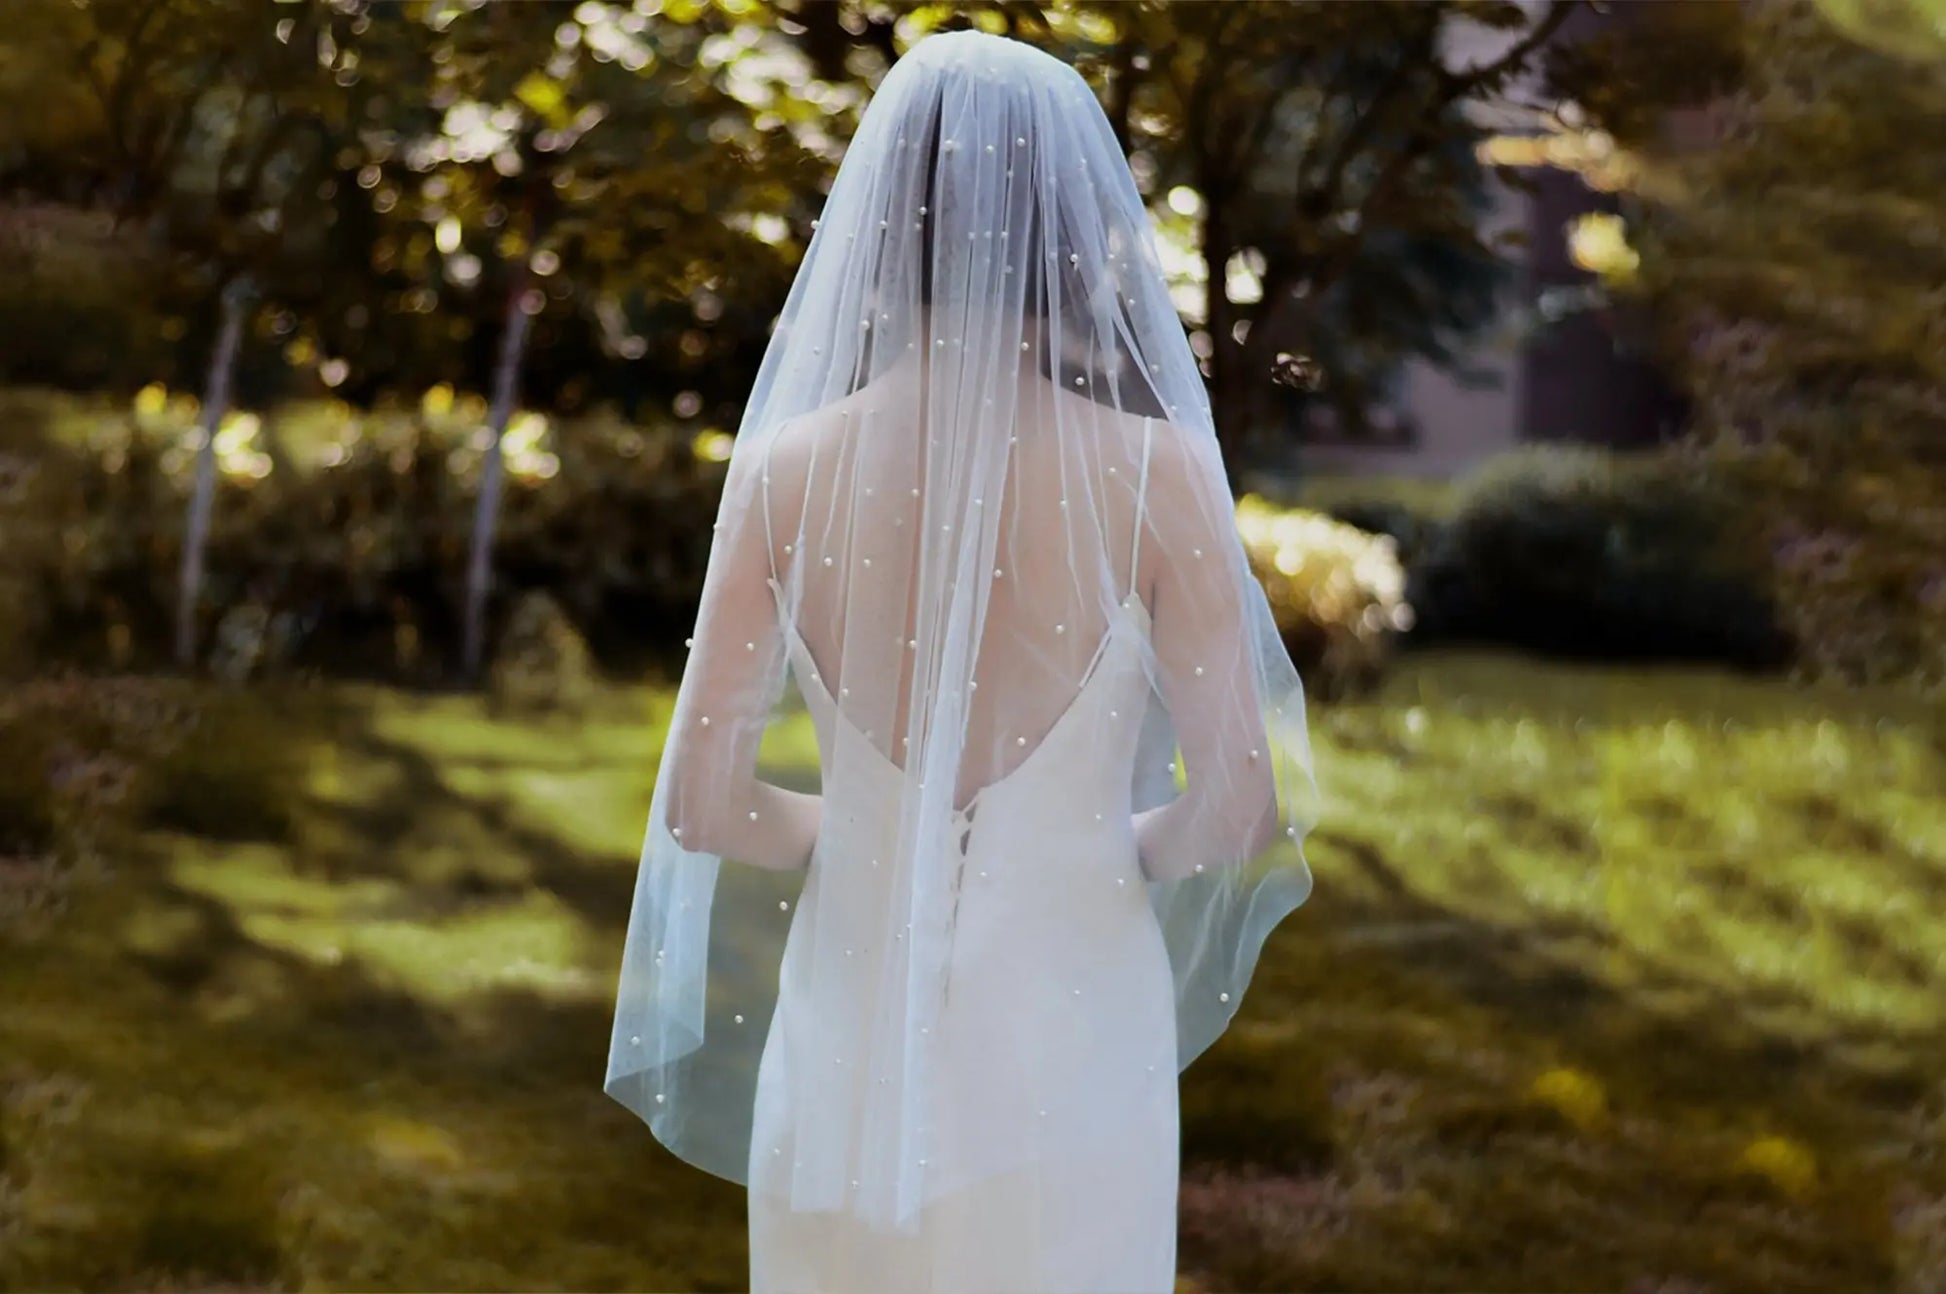 Pearl Veil, Wedding Veil With Pearls, Pearl Veil Cathedral Length